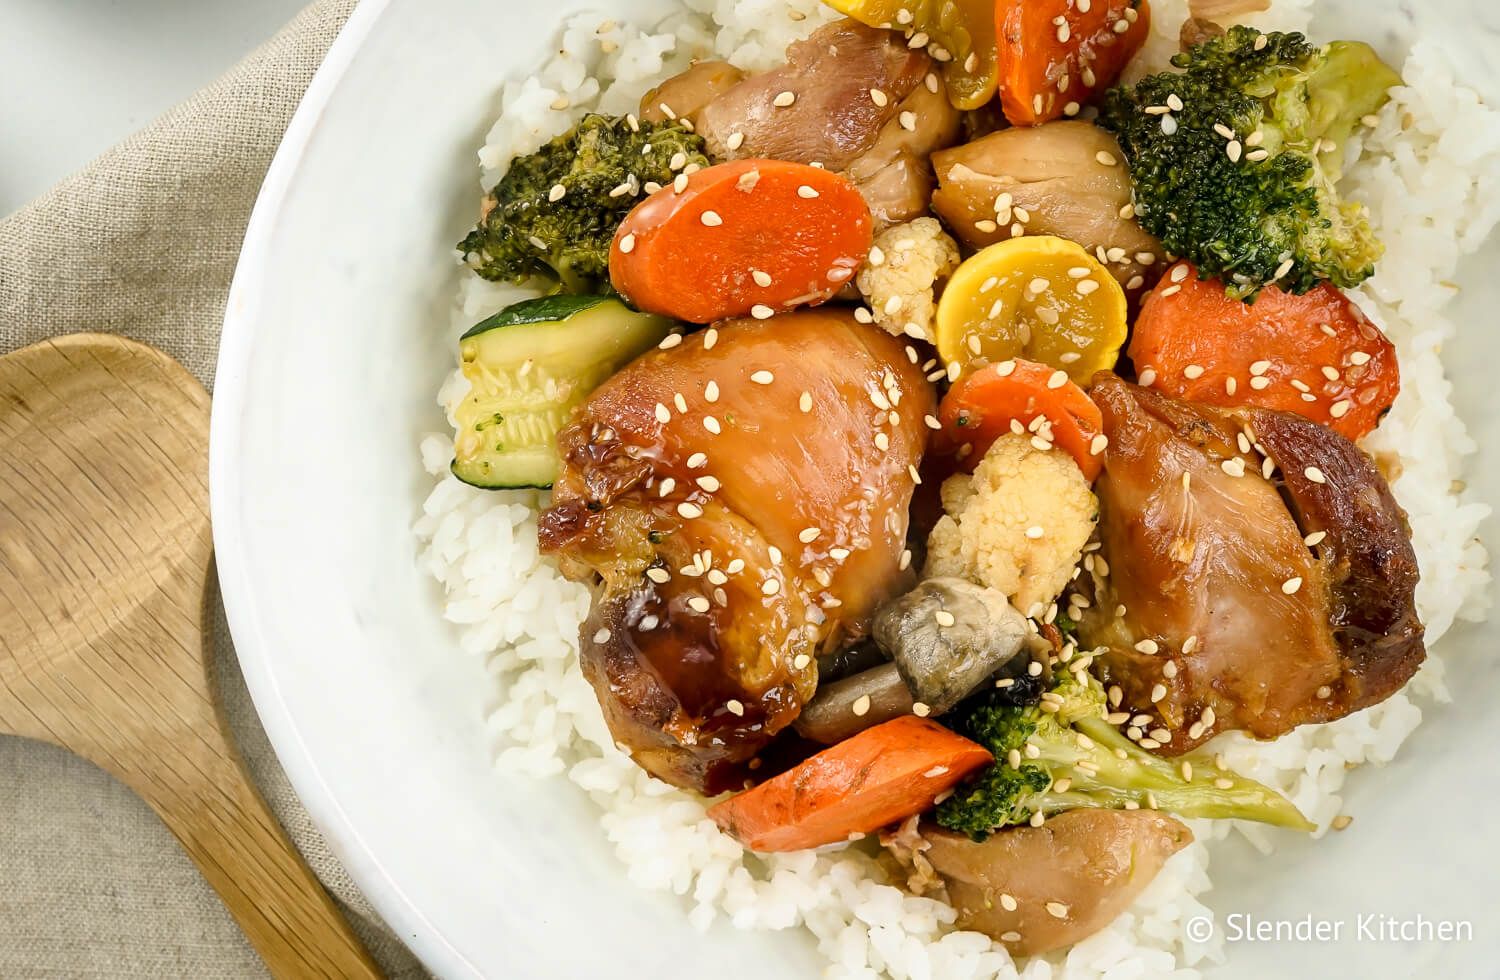 Crockpot Chicken Teriyaki and Vegetables with white rice and vegetables.